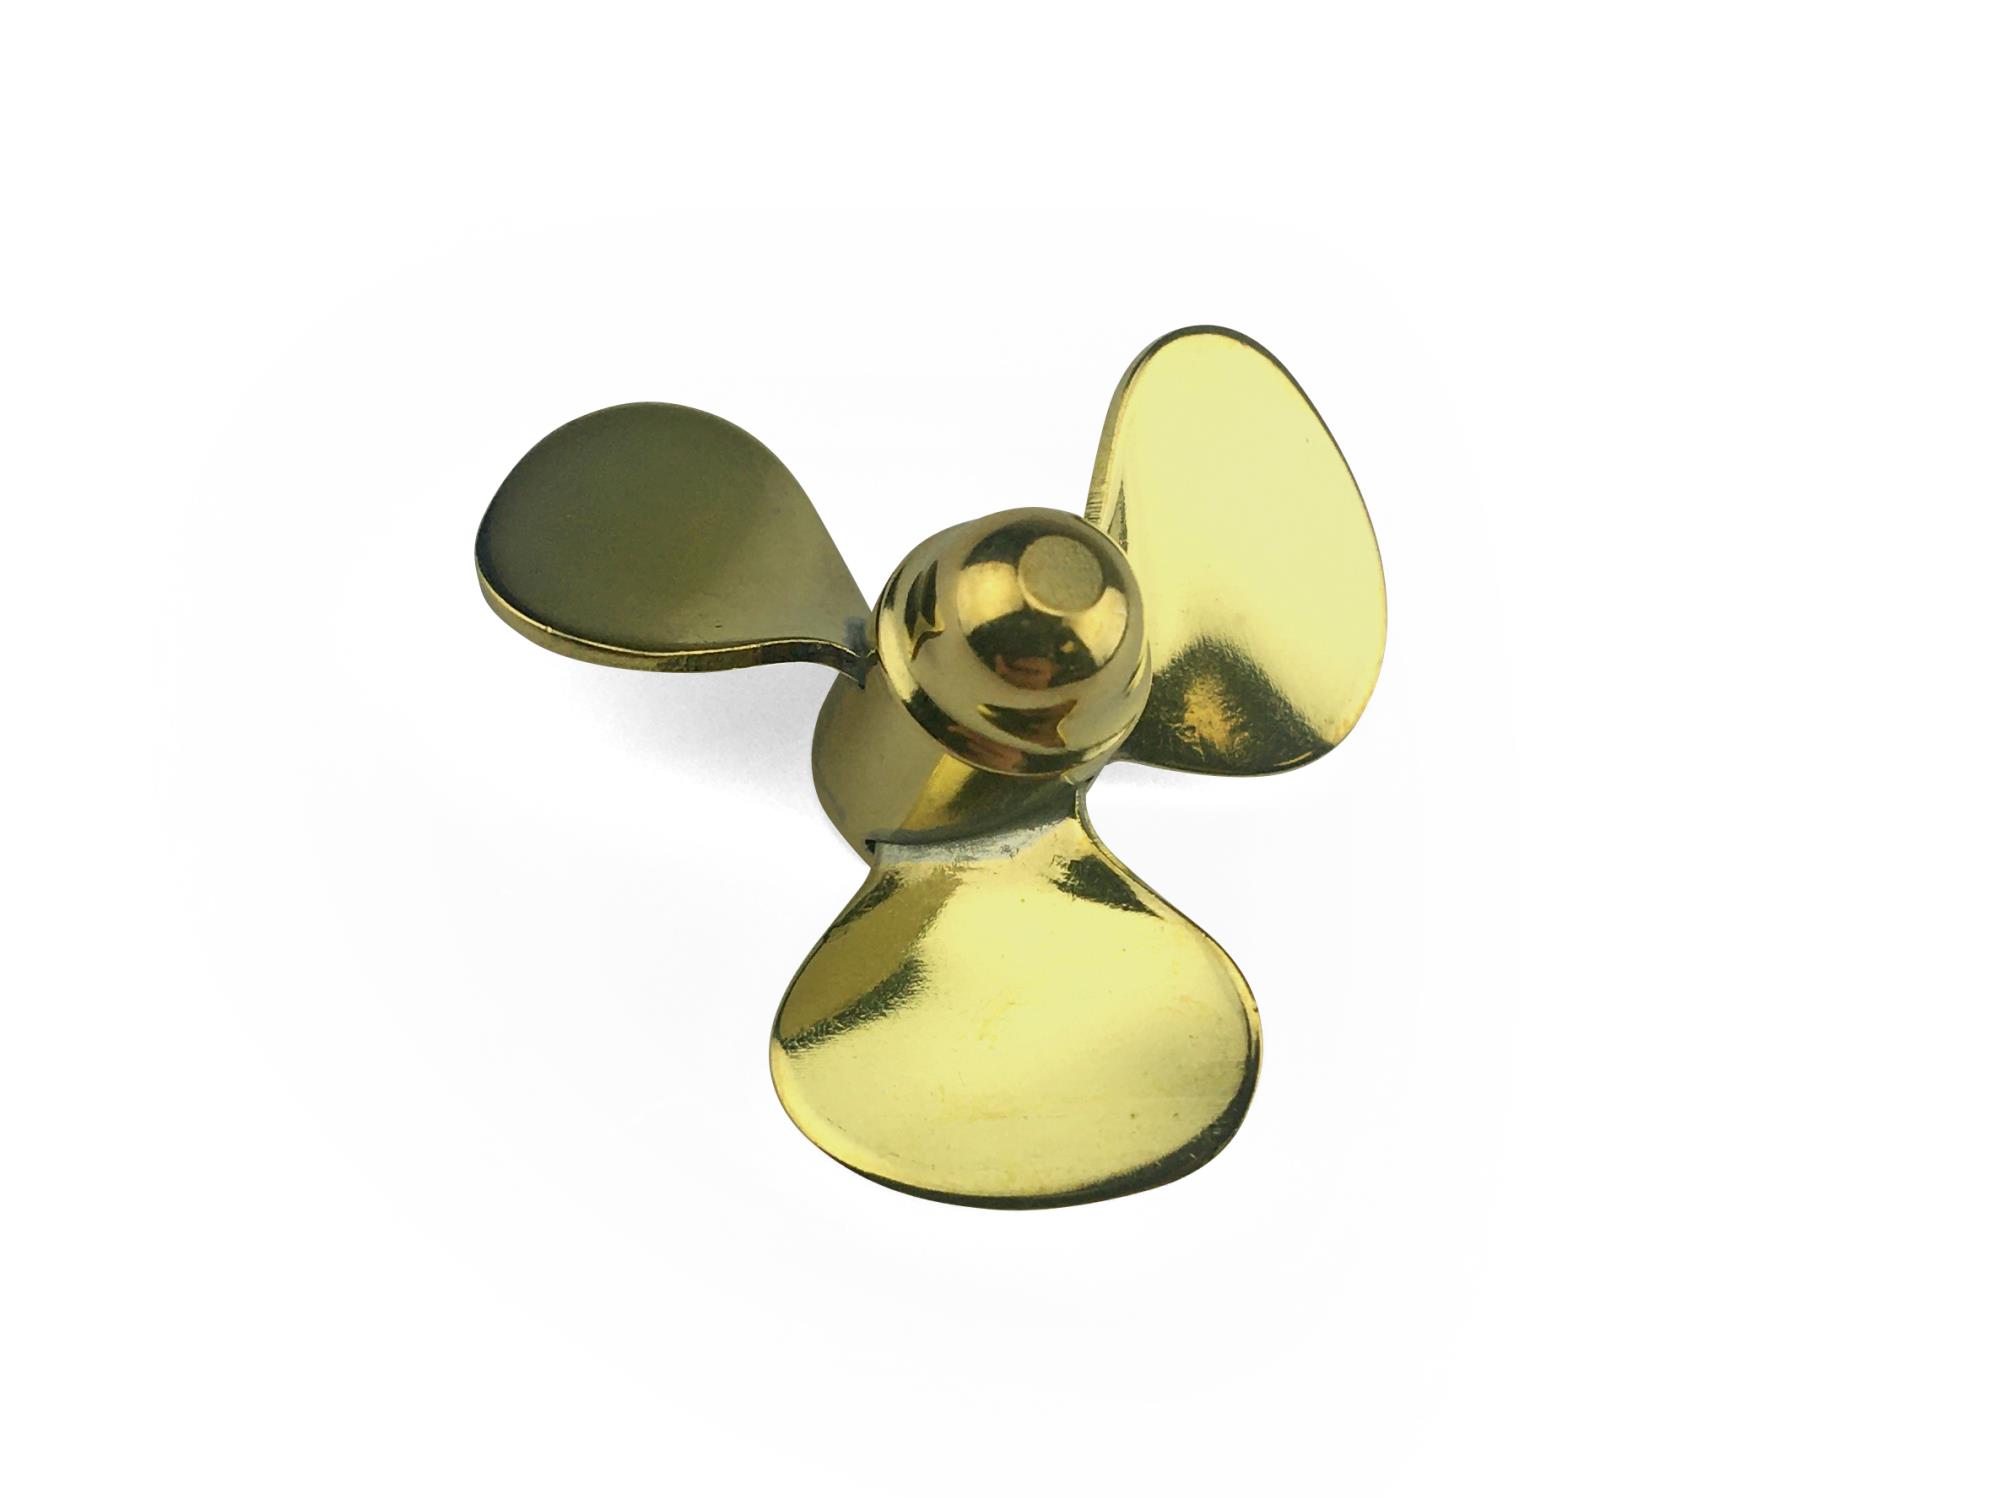 Radio Active Brass Propeller (Classic), 3 Blade, 30mm, M4, RH H-AS13304R H-AS13304R H-AS13304R